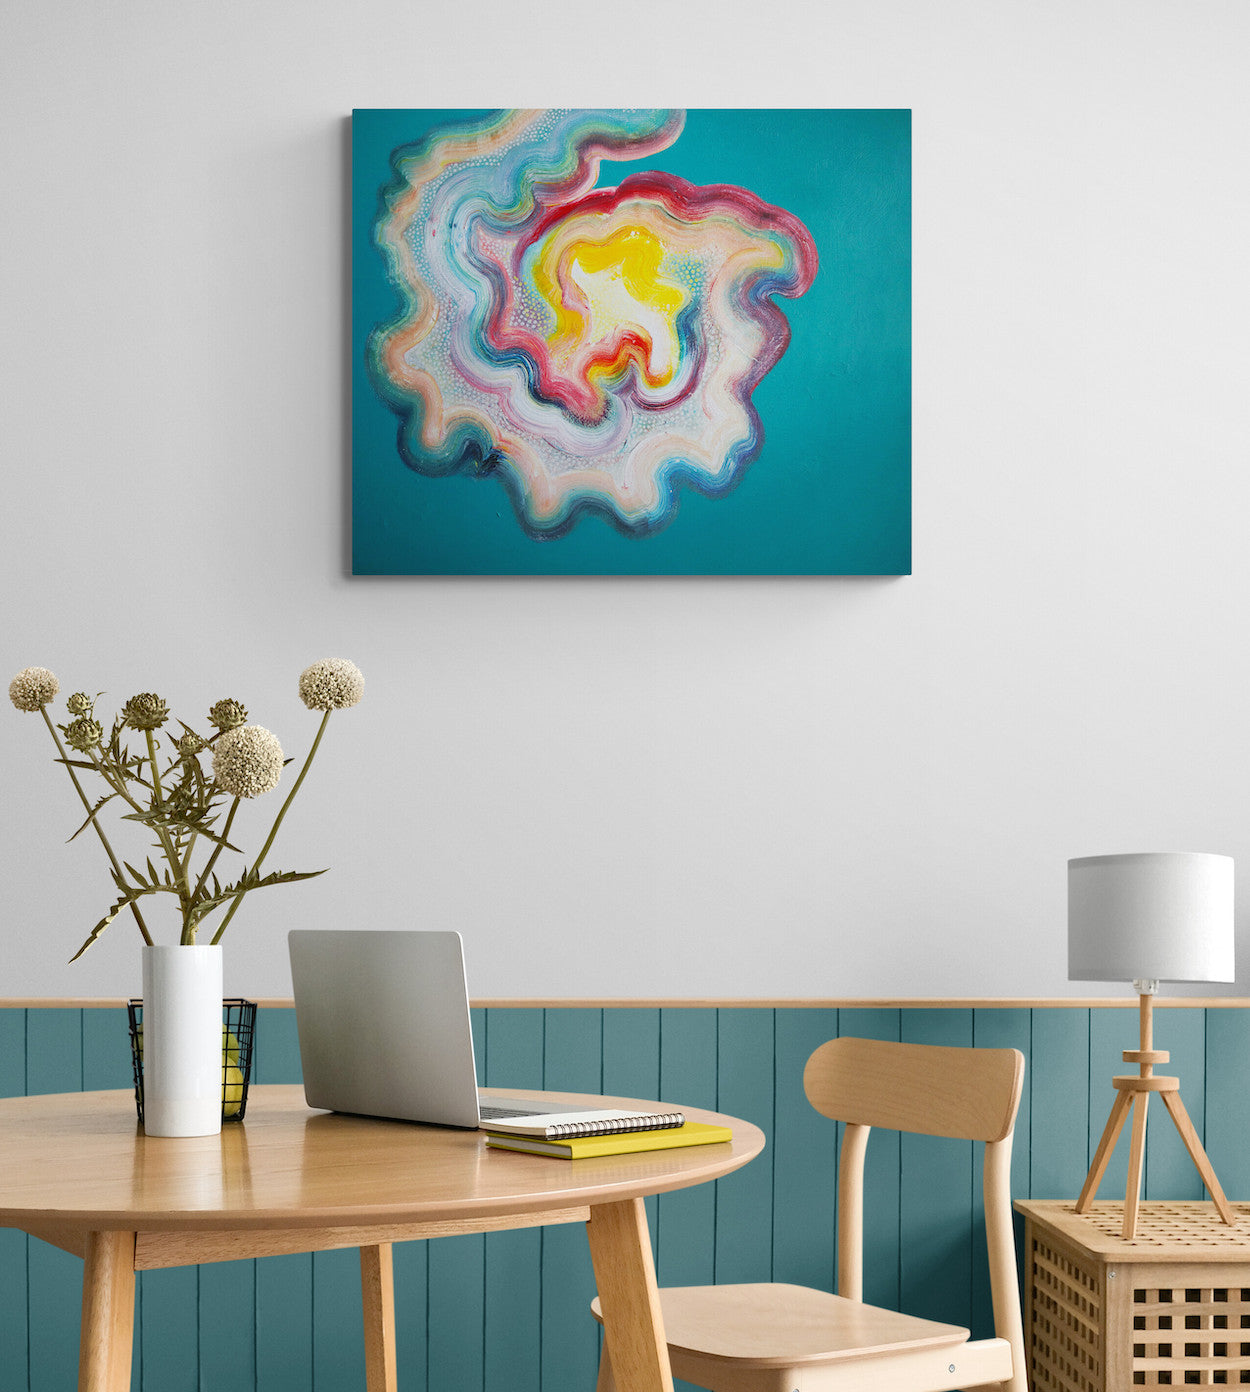 Vibrant contemporary painting on canvas